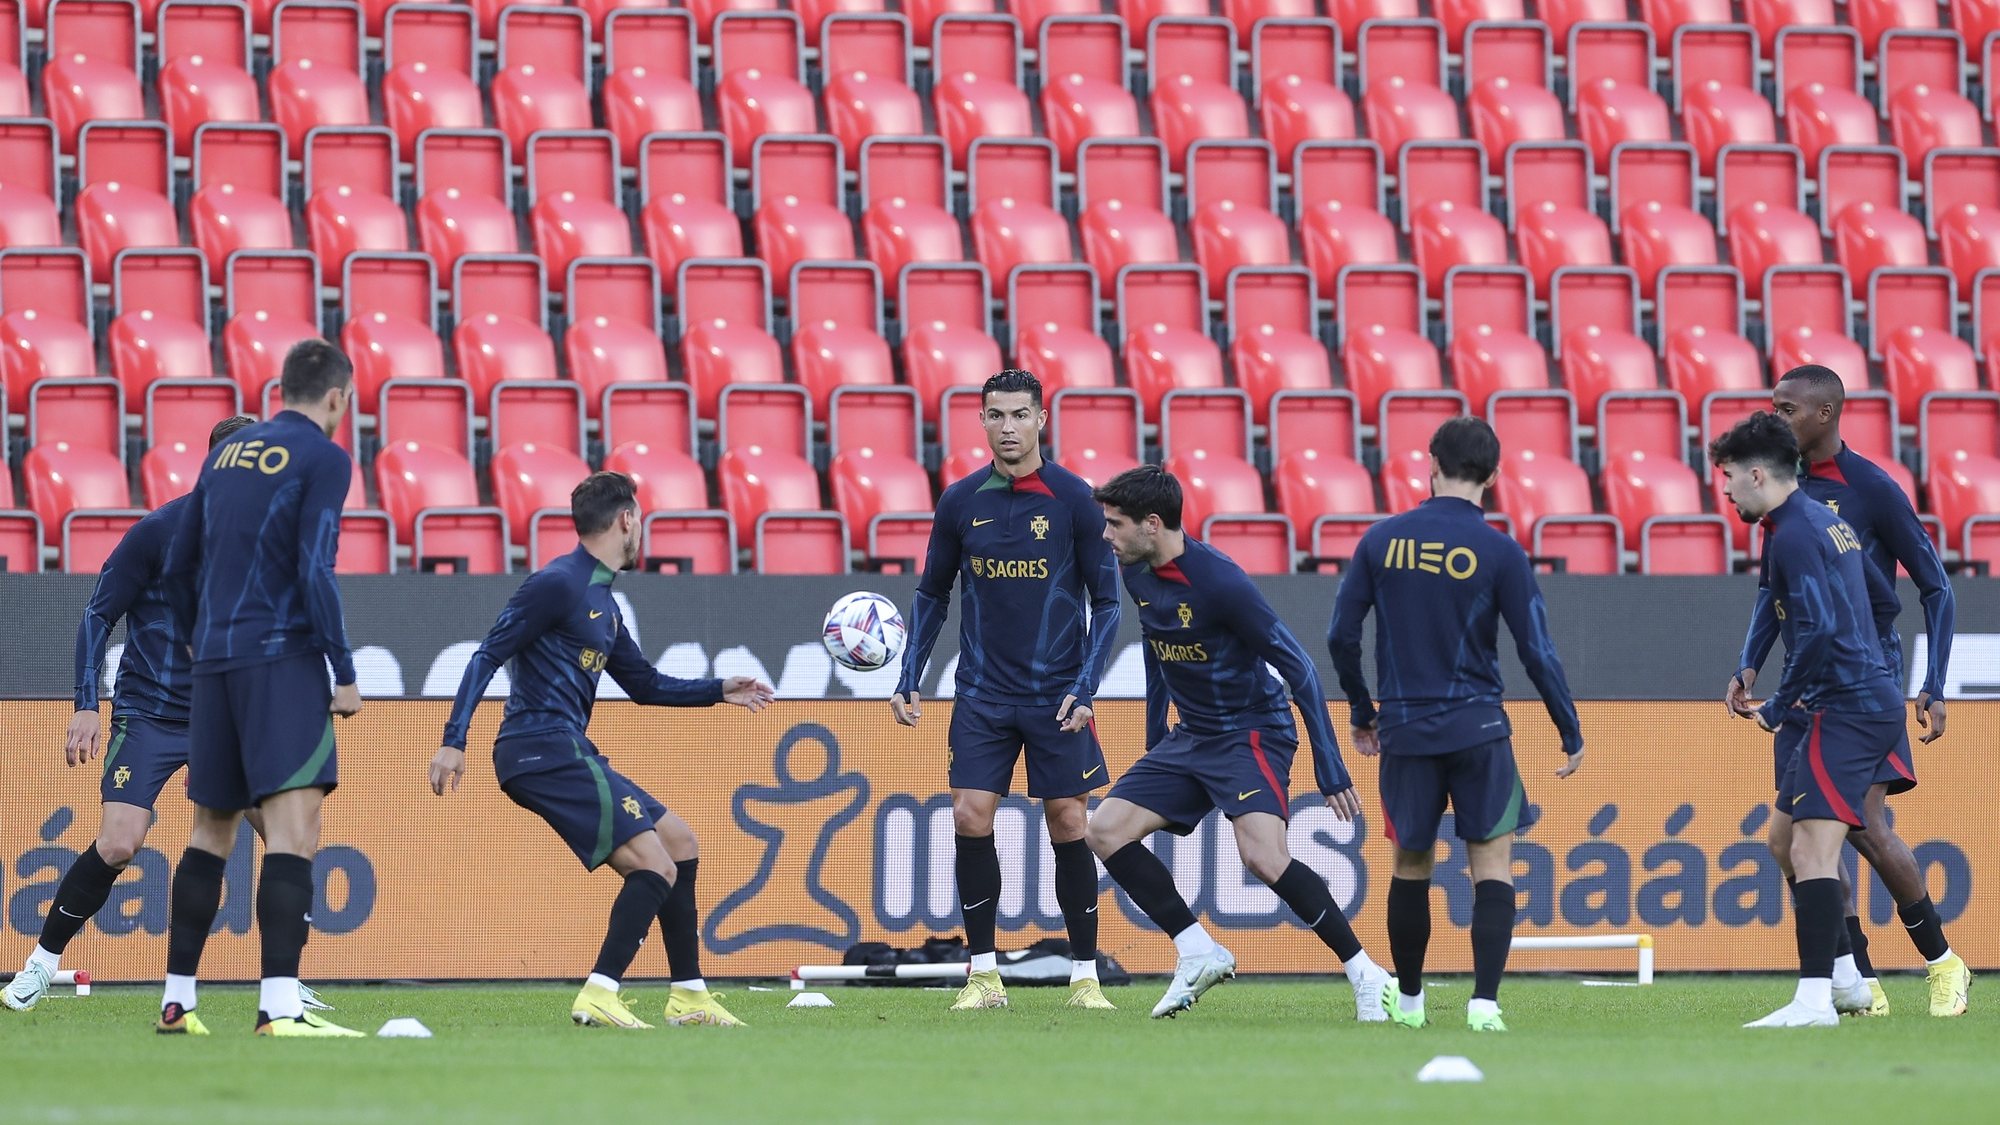 Portugal soccer player Cristiano Ronaldo (C) and his team mates during the training session prior to tomorrows UEFA Nations League soccer match against Czech Republic at Sinobo Stadium in Prague Czech Republic, 23 September 2022. MIGUEL A. LOPES/LUSA